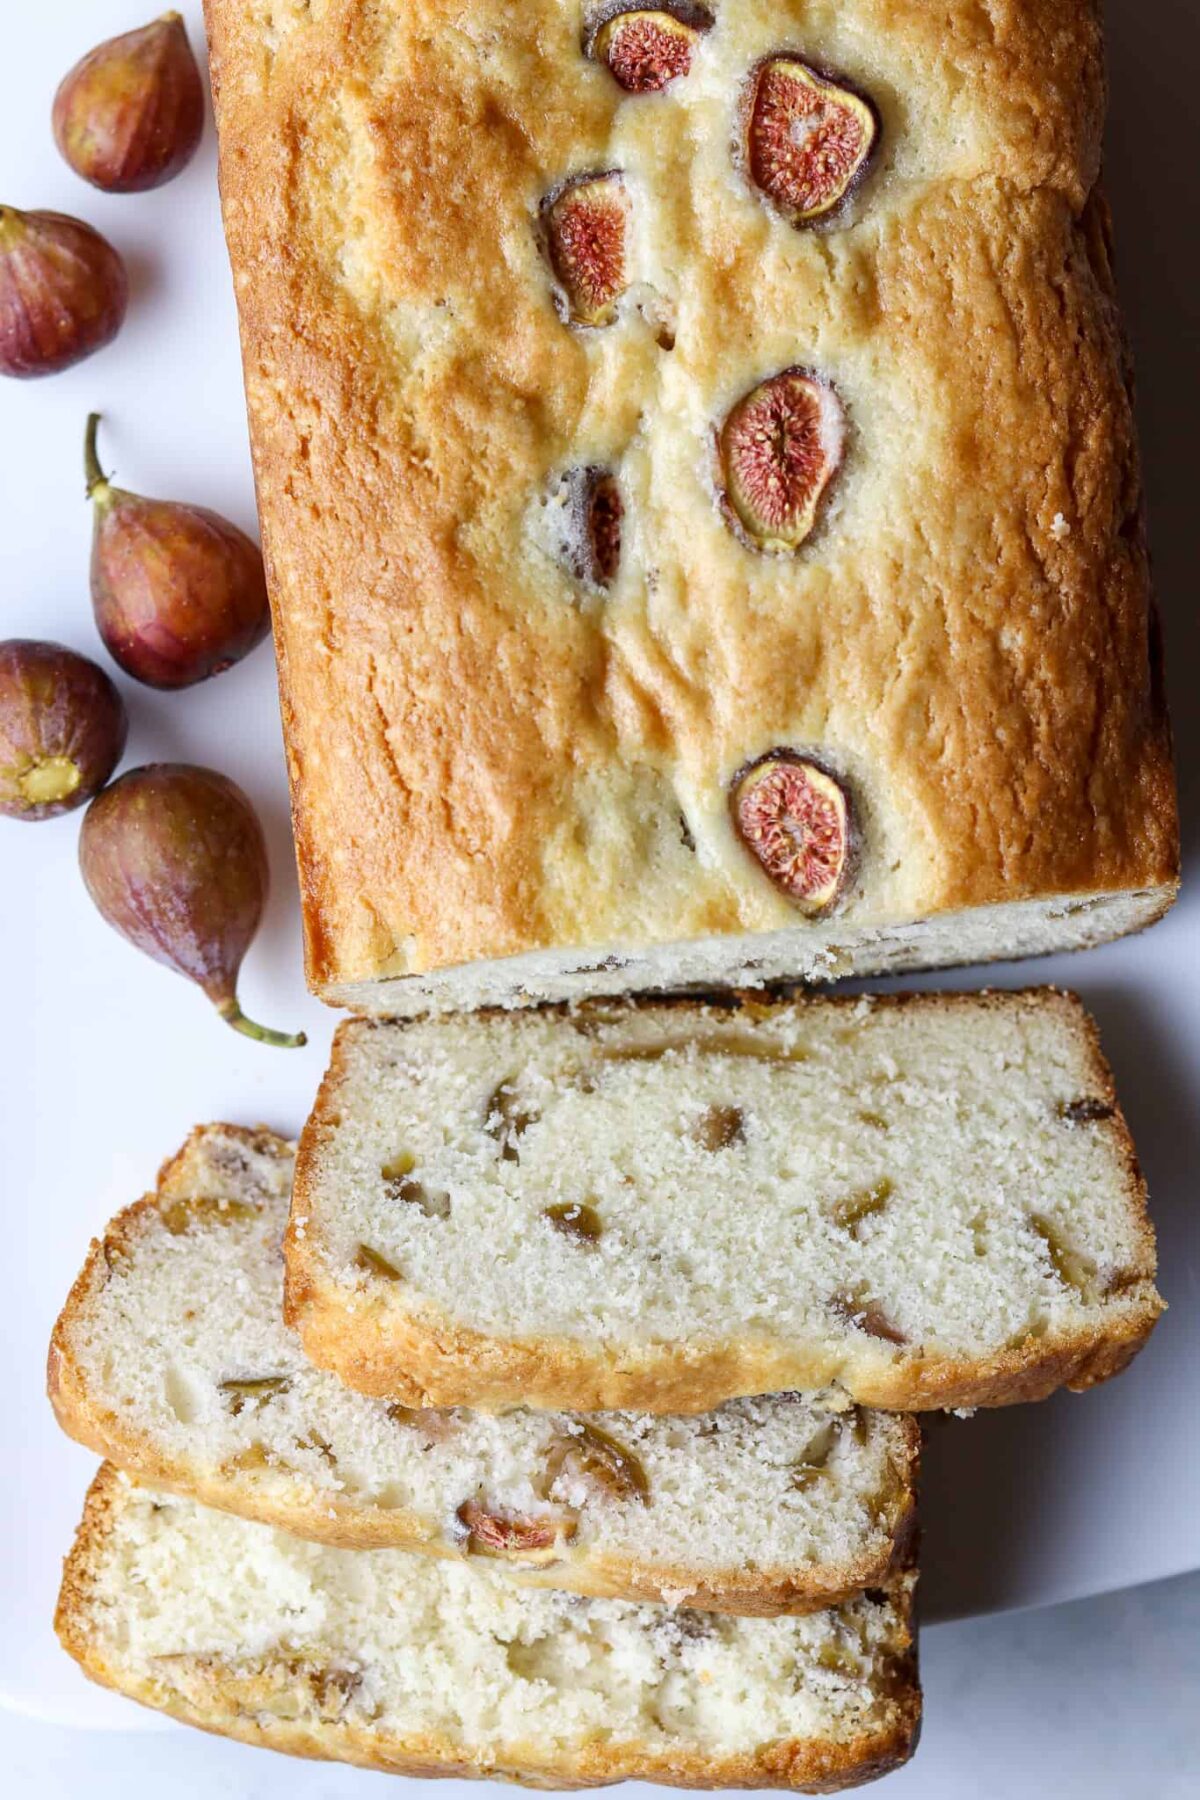 A sliced loaf of fresh fig bread laying next to fresh figs.